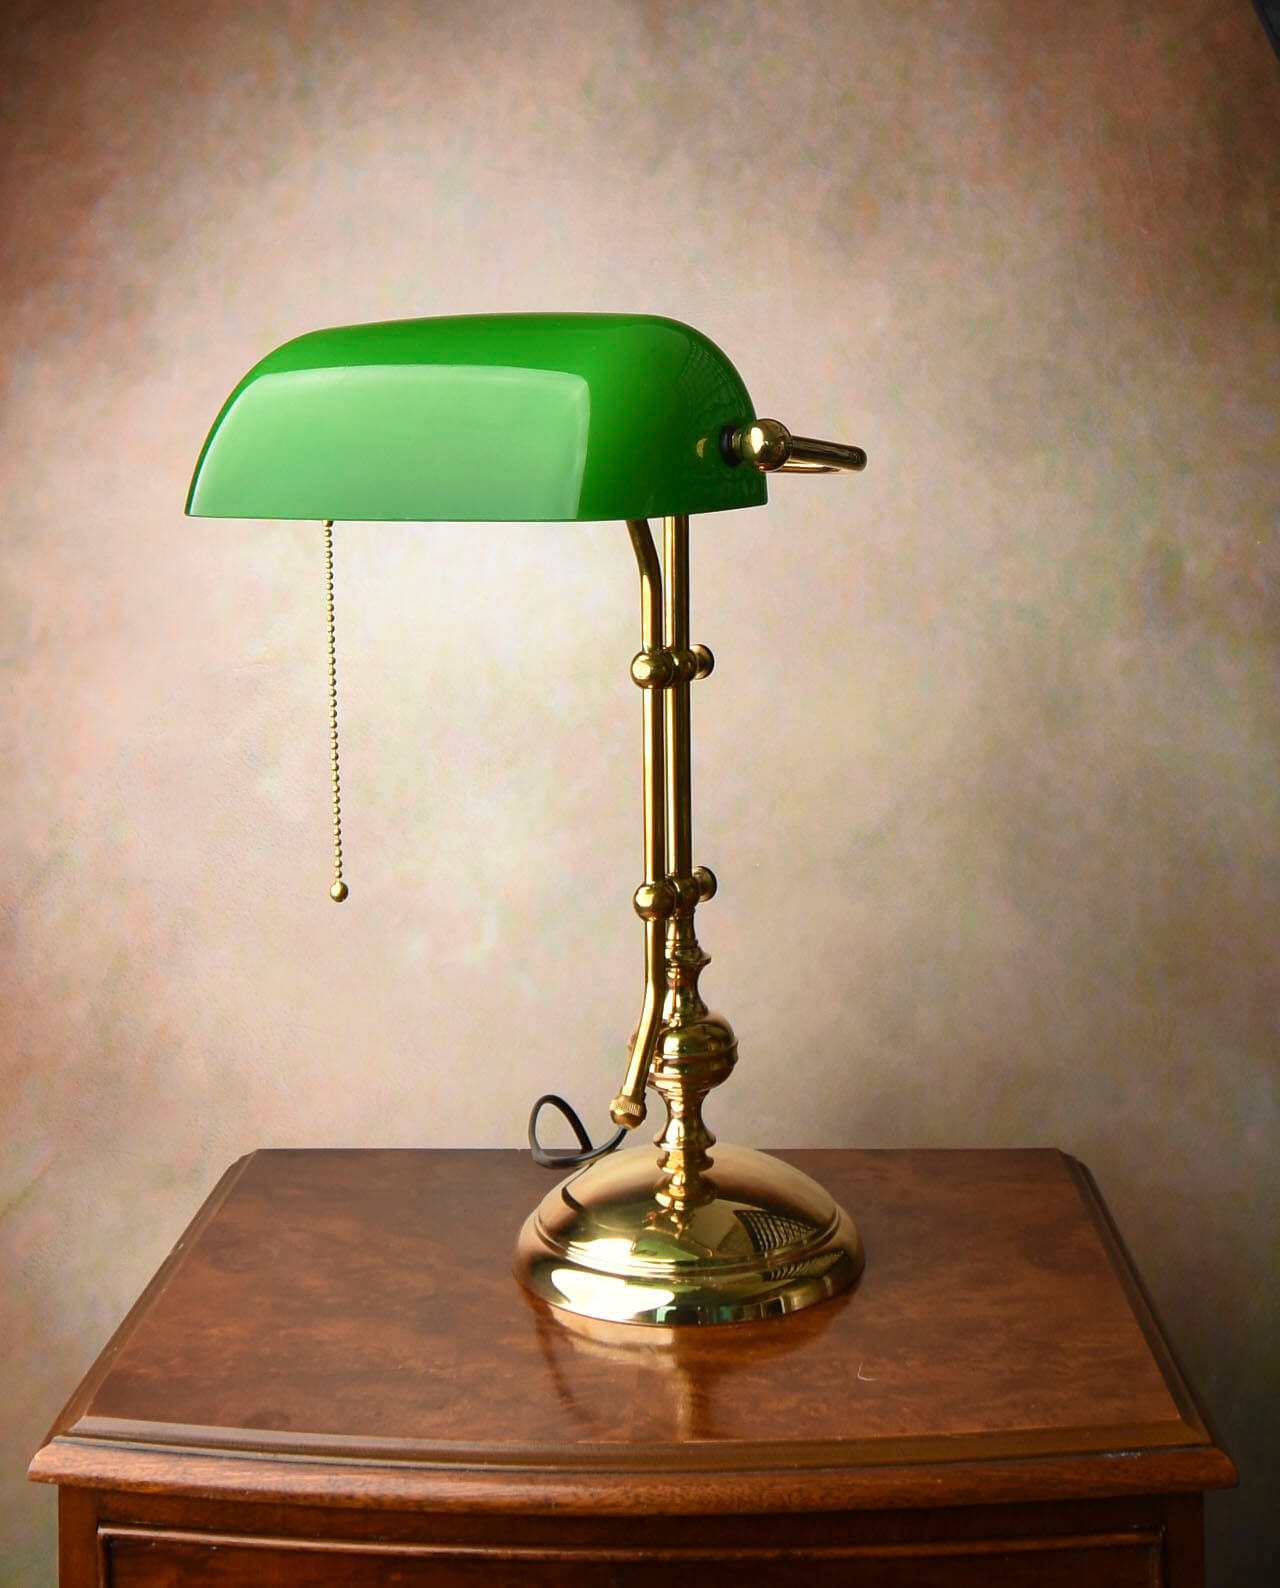 Cabinet Banker Lamp Gold Look Green Glass Shade, Great Home and Office Decor